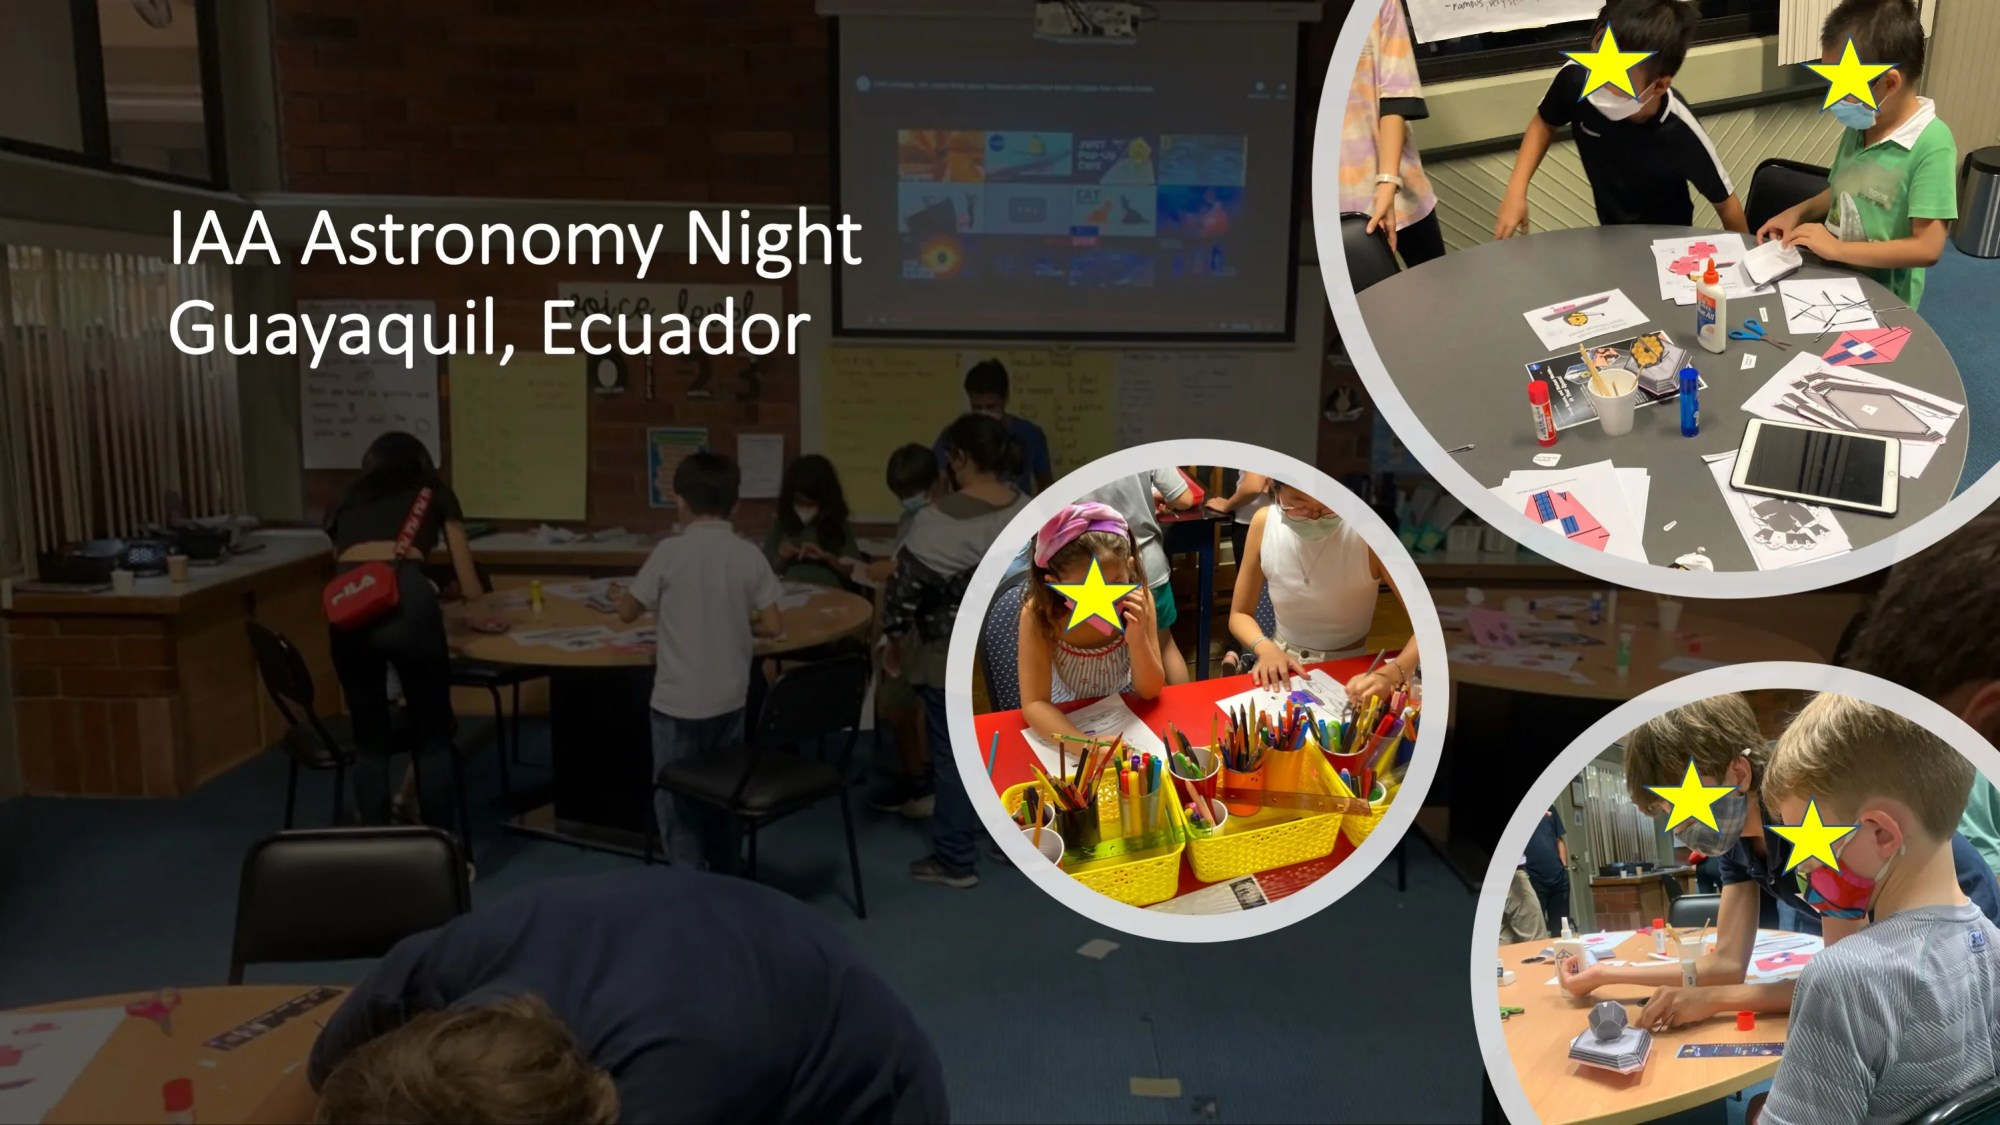 Slide 2 from the Event: Students participating in Astronomy night activities. Students created paper craft versions of Webb and coloring activities related to the science of Webb.